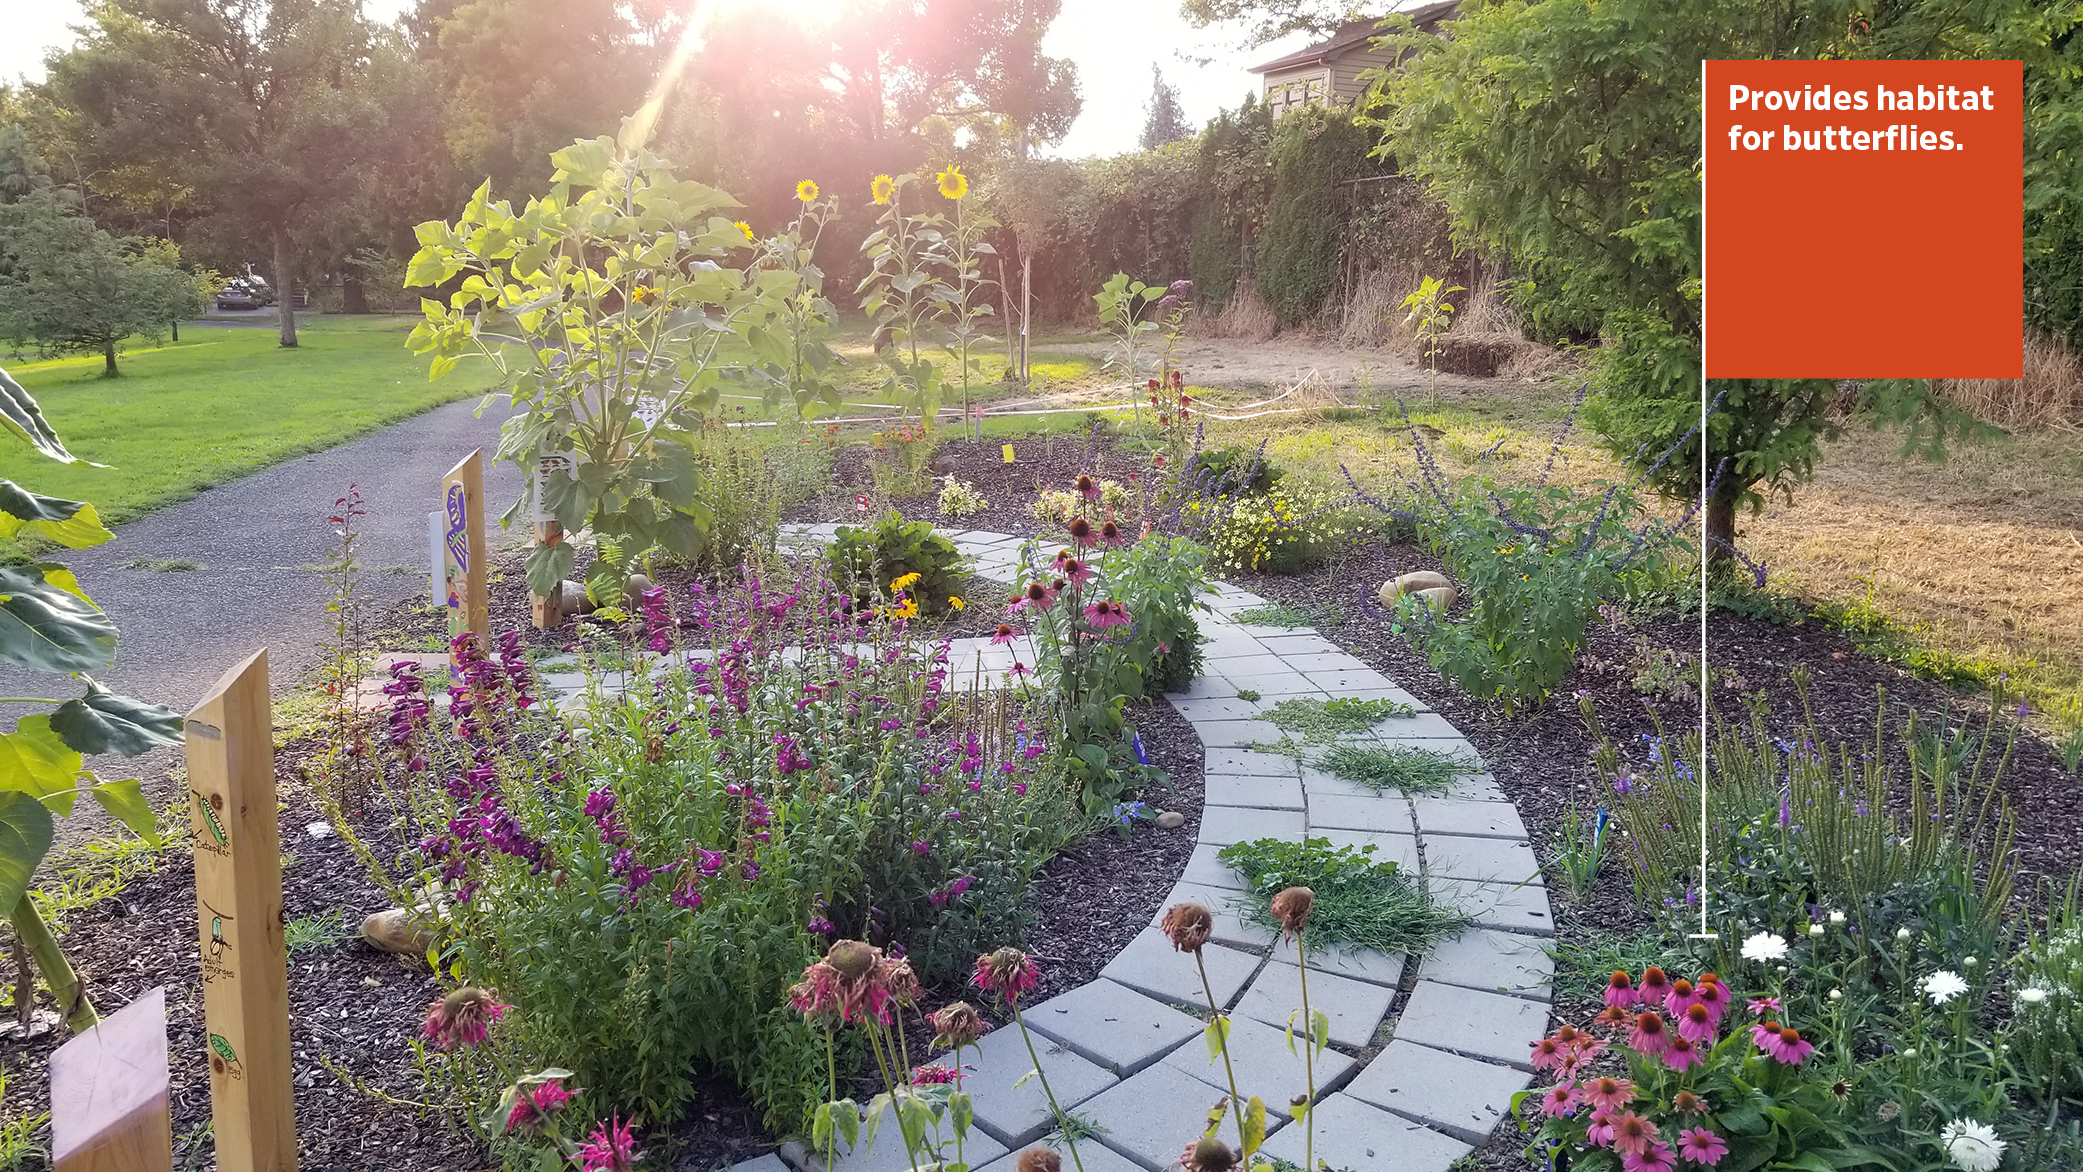 At Hough Elementary School in Vancouver, Washington, a garden was designed to provide habitat for butterflies, bees, and other insect pollinators.